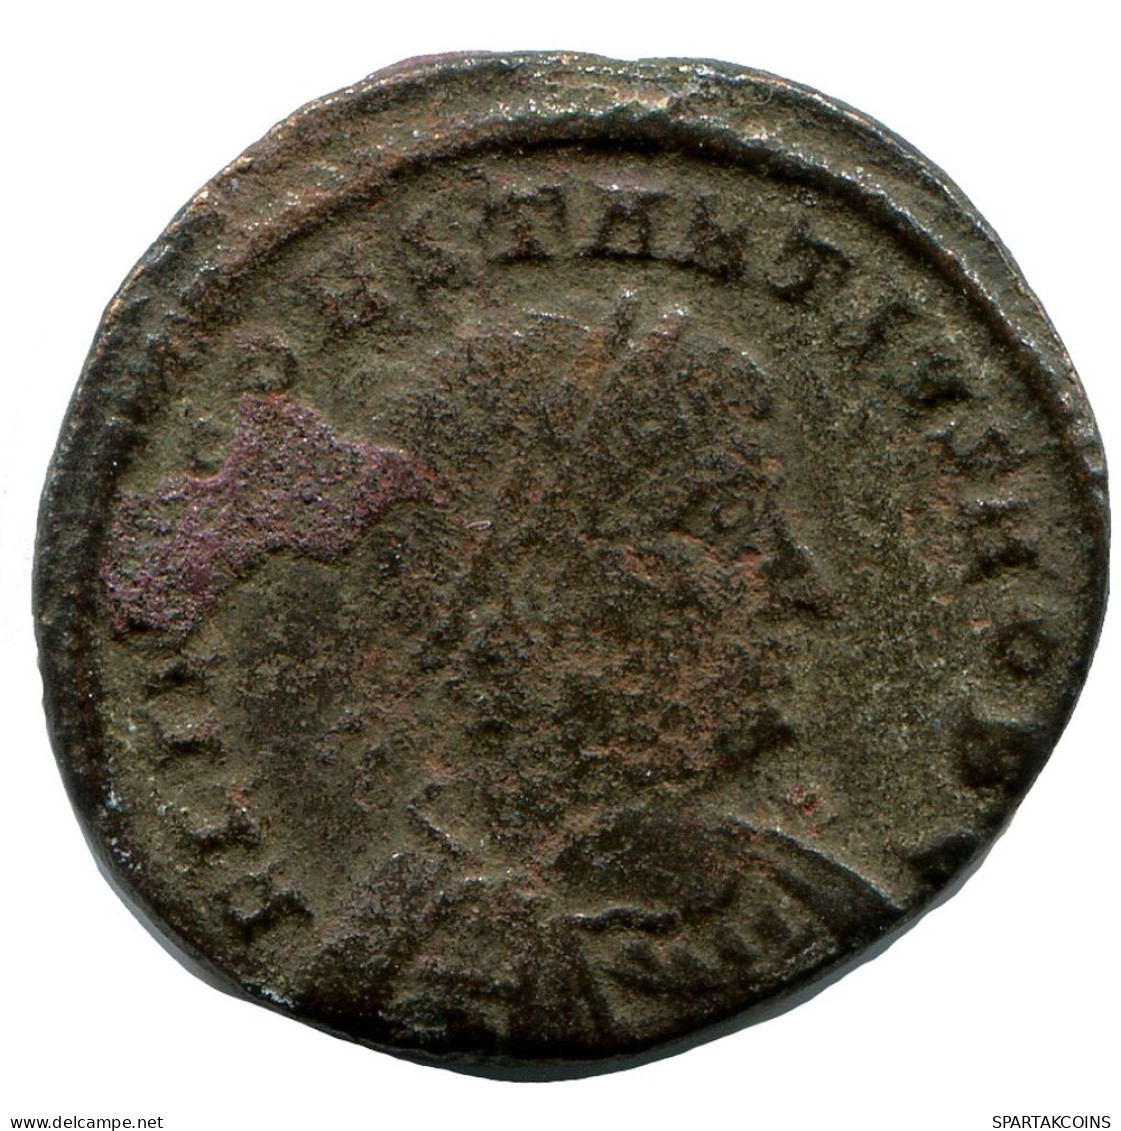 CONSTANTIUS II ALEKSANDRIA FROM THE ROYAL ONTARIO MUSEUM #ANC10478.14.U.A - The Christian Empire (307 AD To 363 AD)